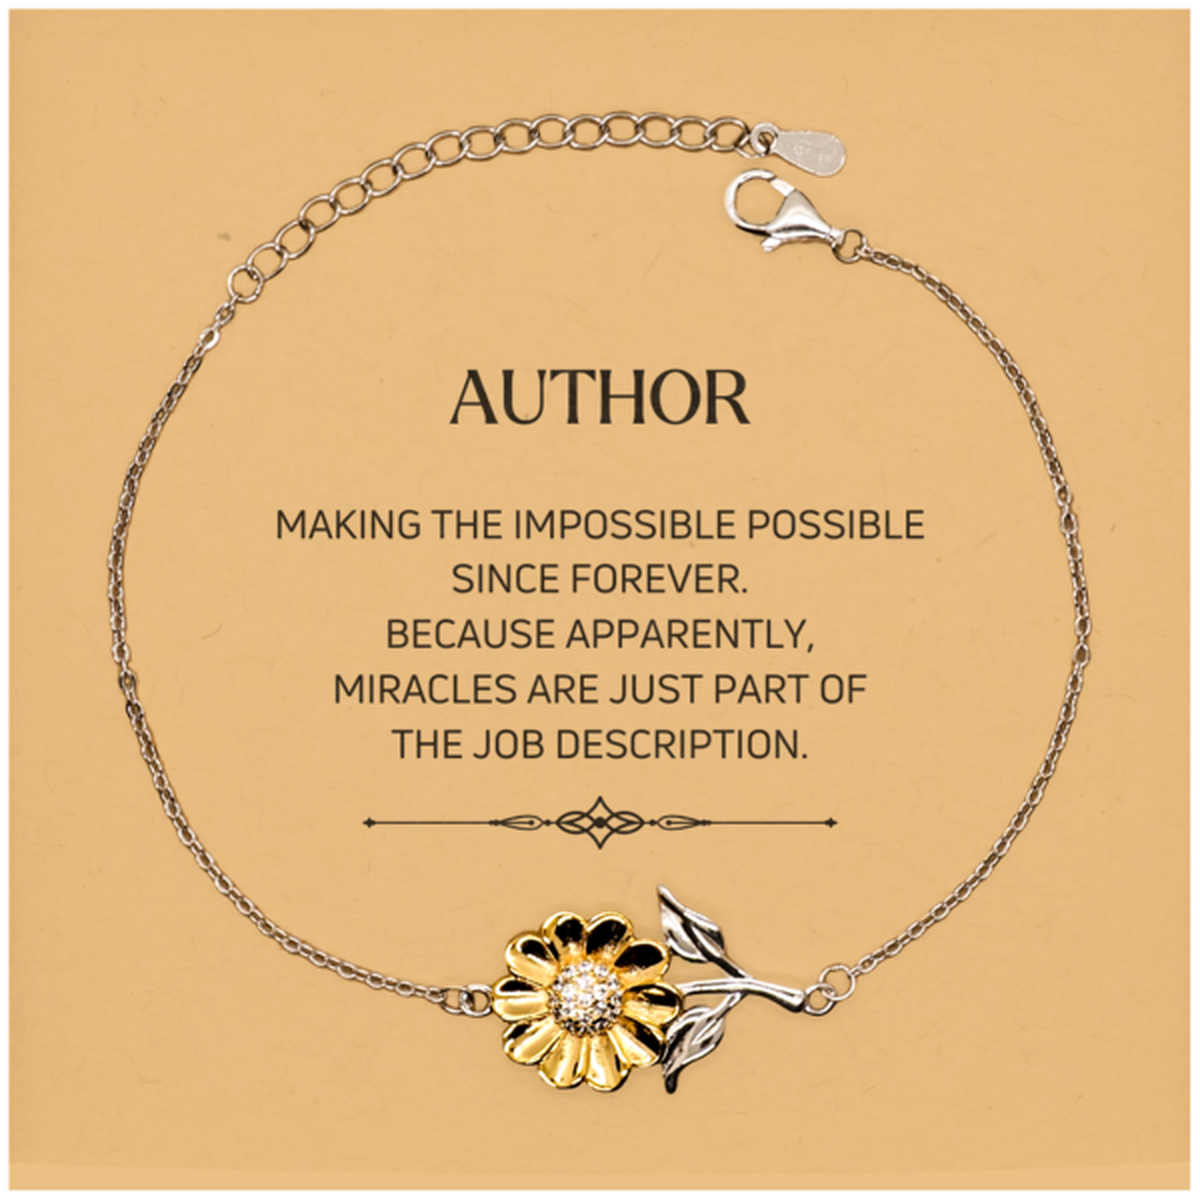 Funny Author Gifts, Miracles are just part of the job description, Inspirational Birthday Christmas Sunflower Bracelet For Author, Men, Women, Coworkers, Friends, Boss